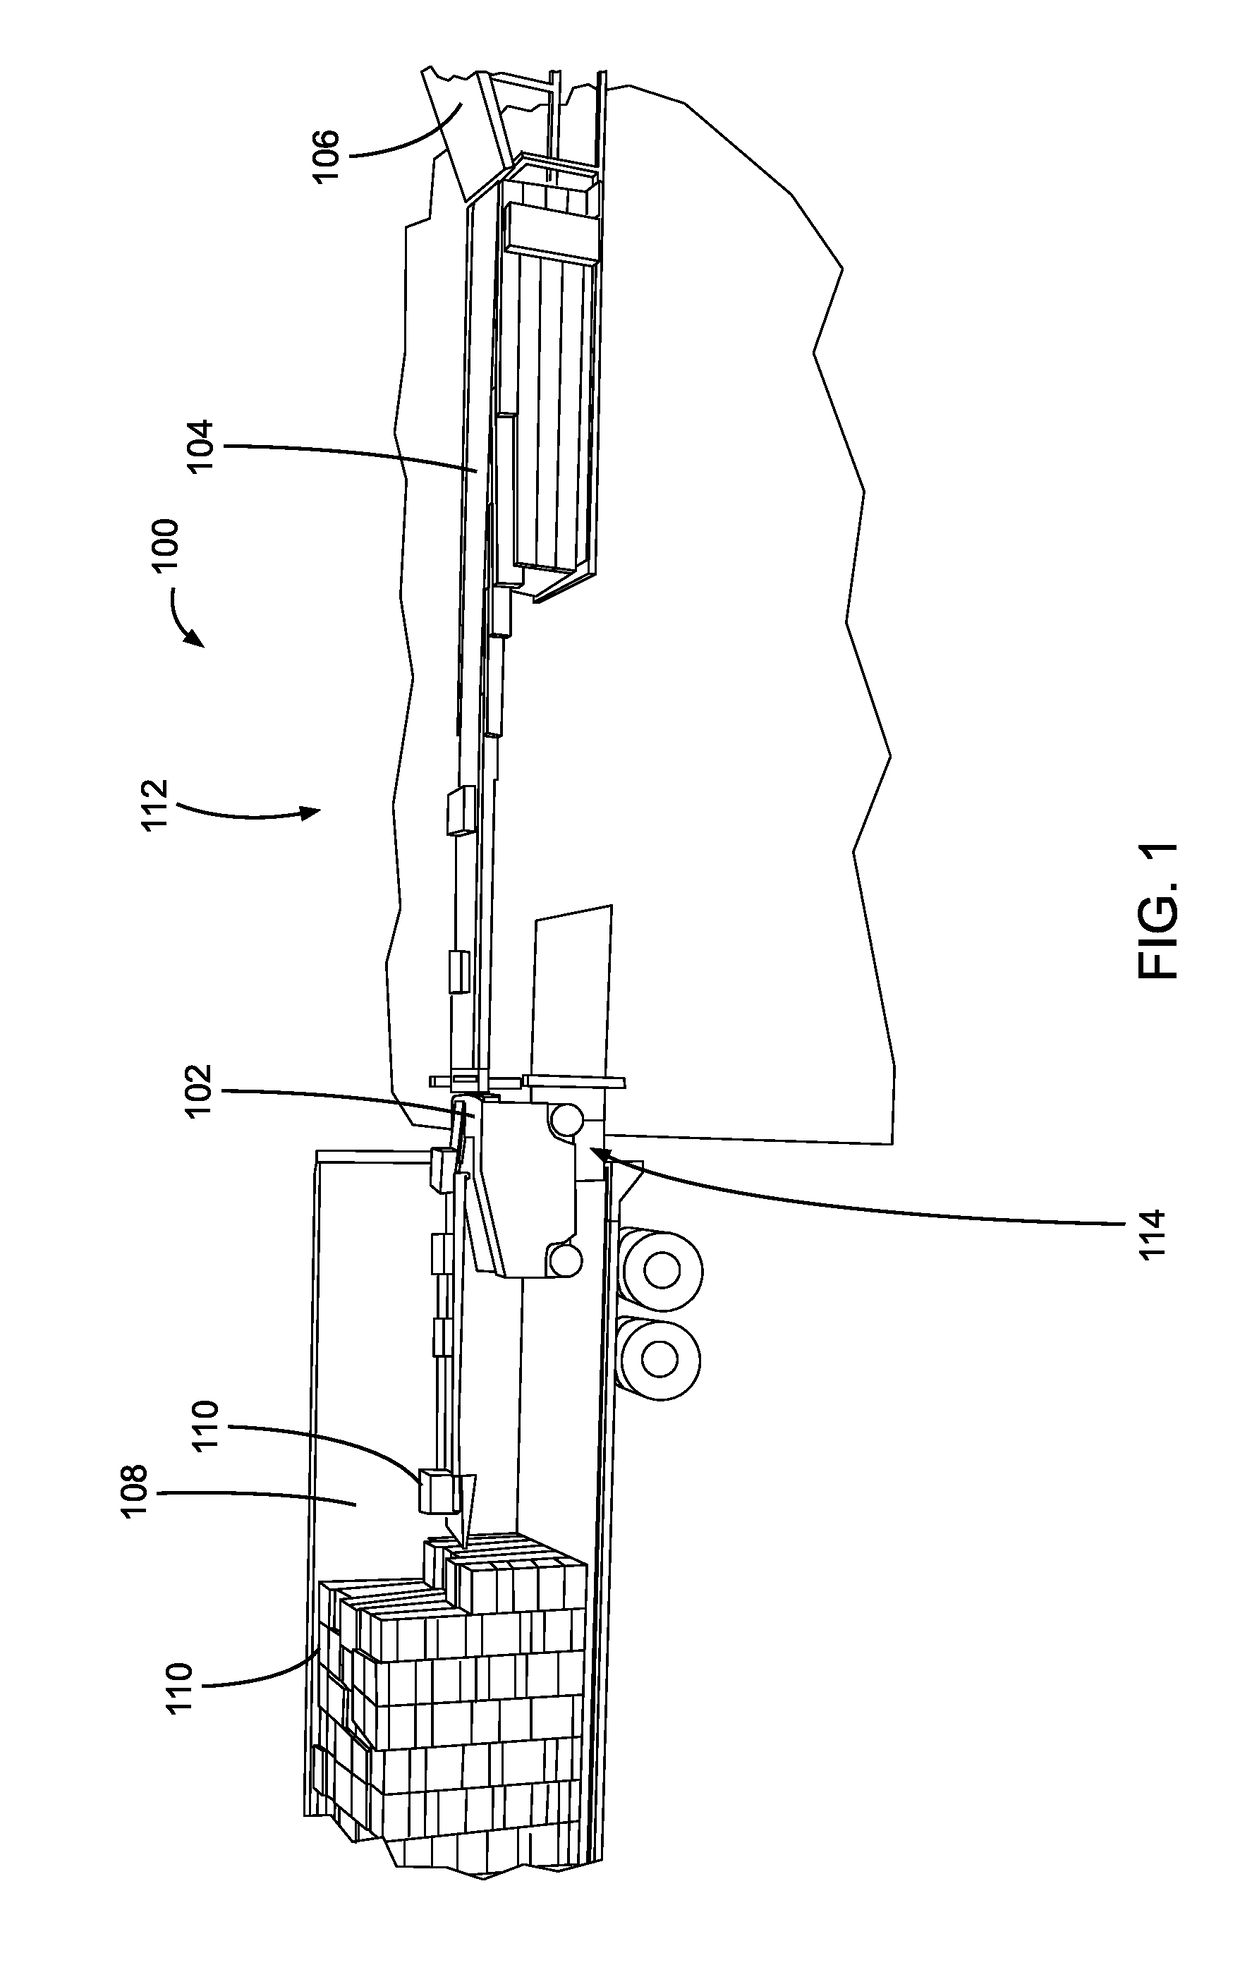 Automated unloading and loading robot system